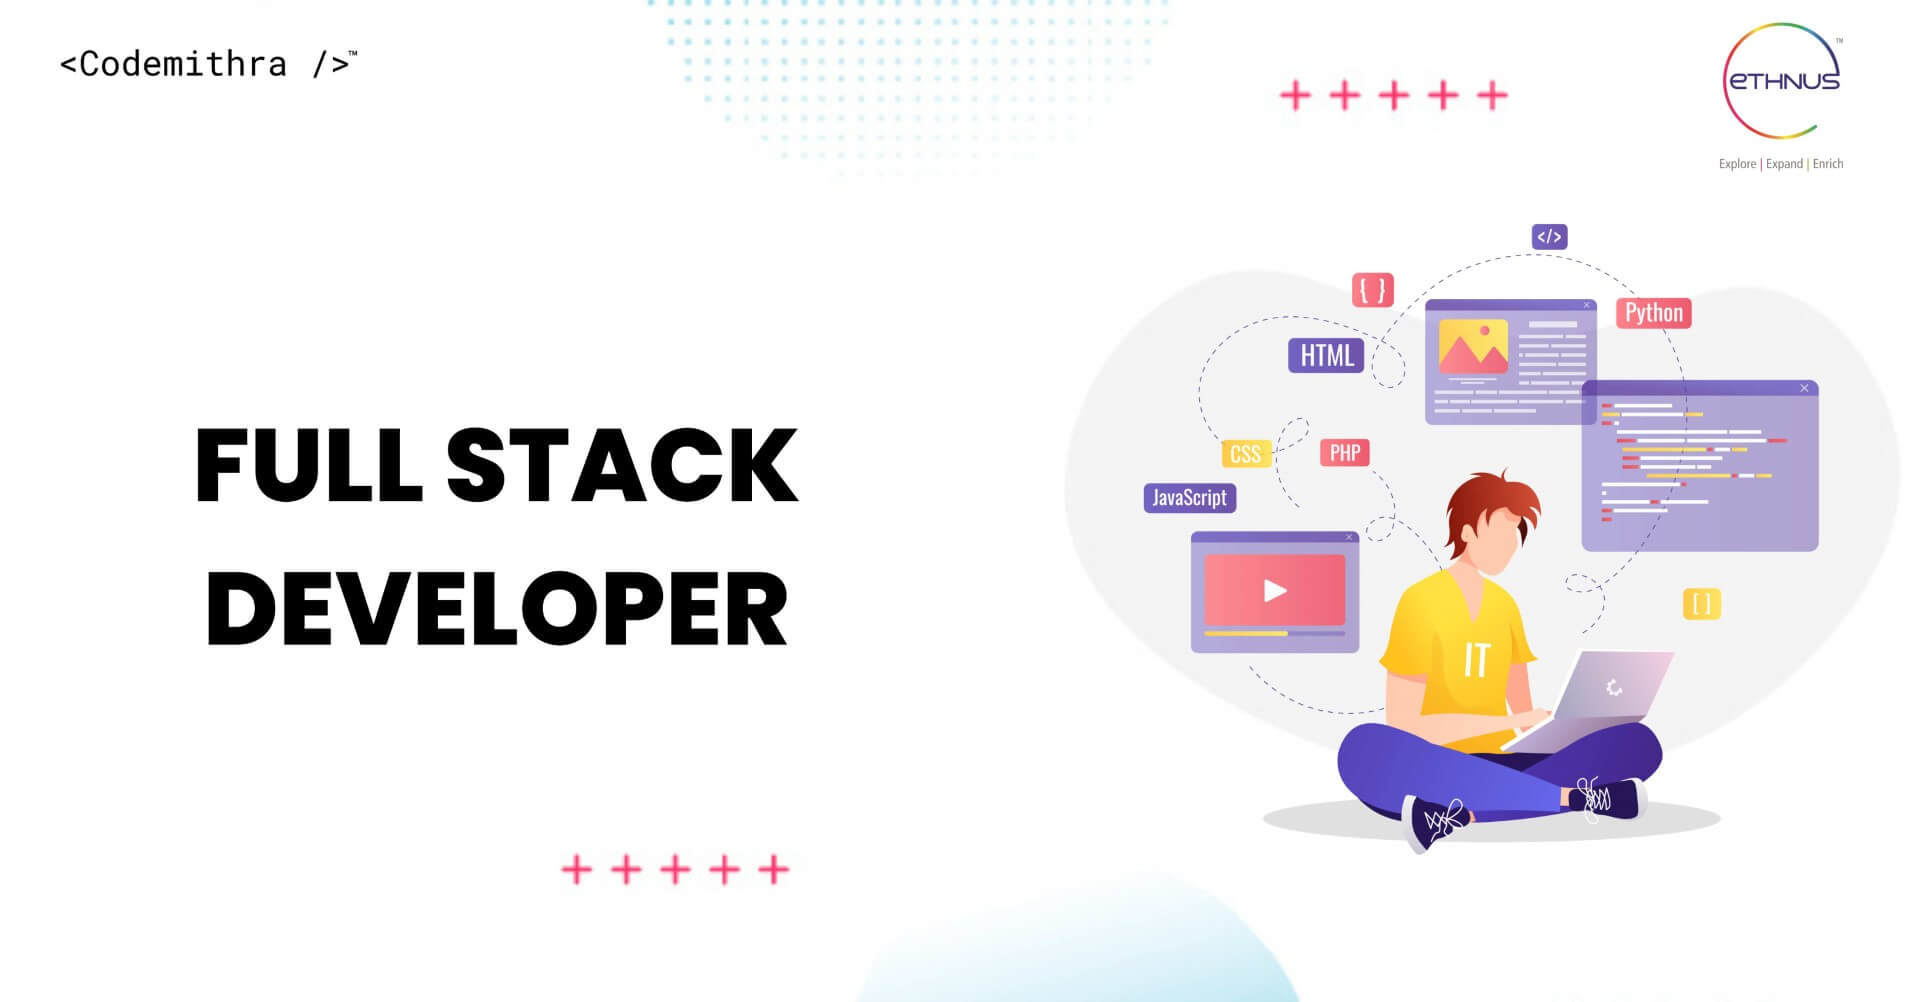 Launch Your Career as a Full Stack Developer